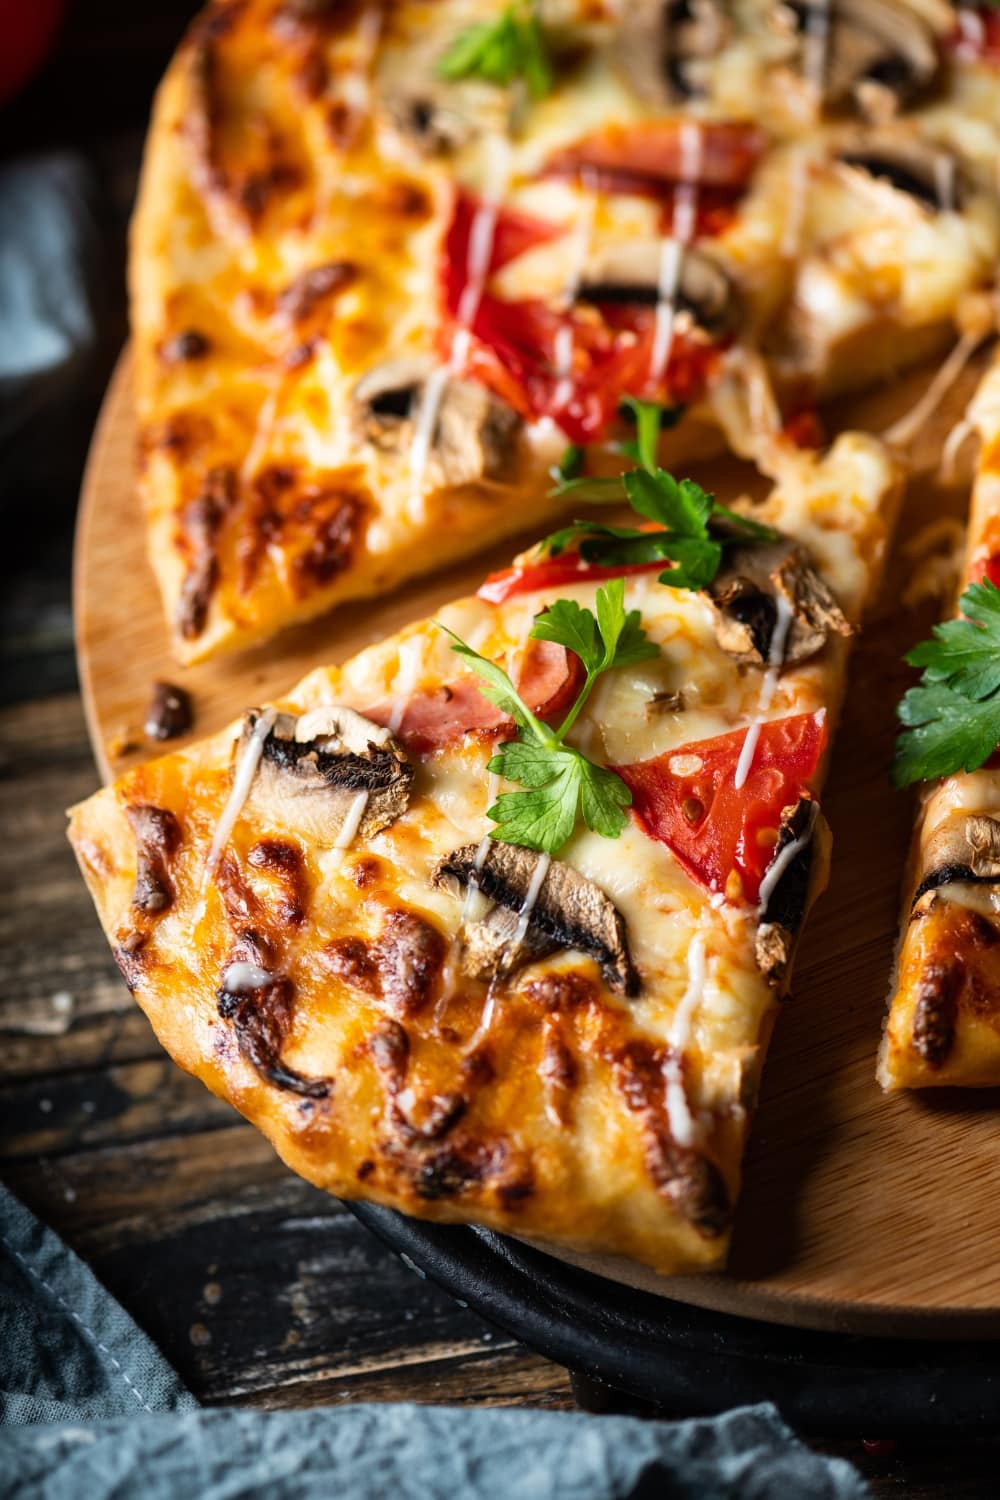 Sliced Grilled Pepperoni Pizza with Mushrooms, Mozzarella and Tomatoes Served on a Wooden Pizza Board